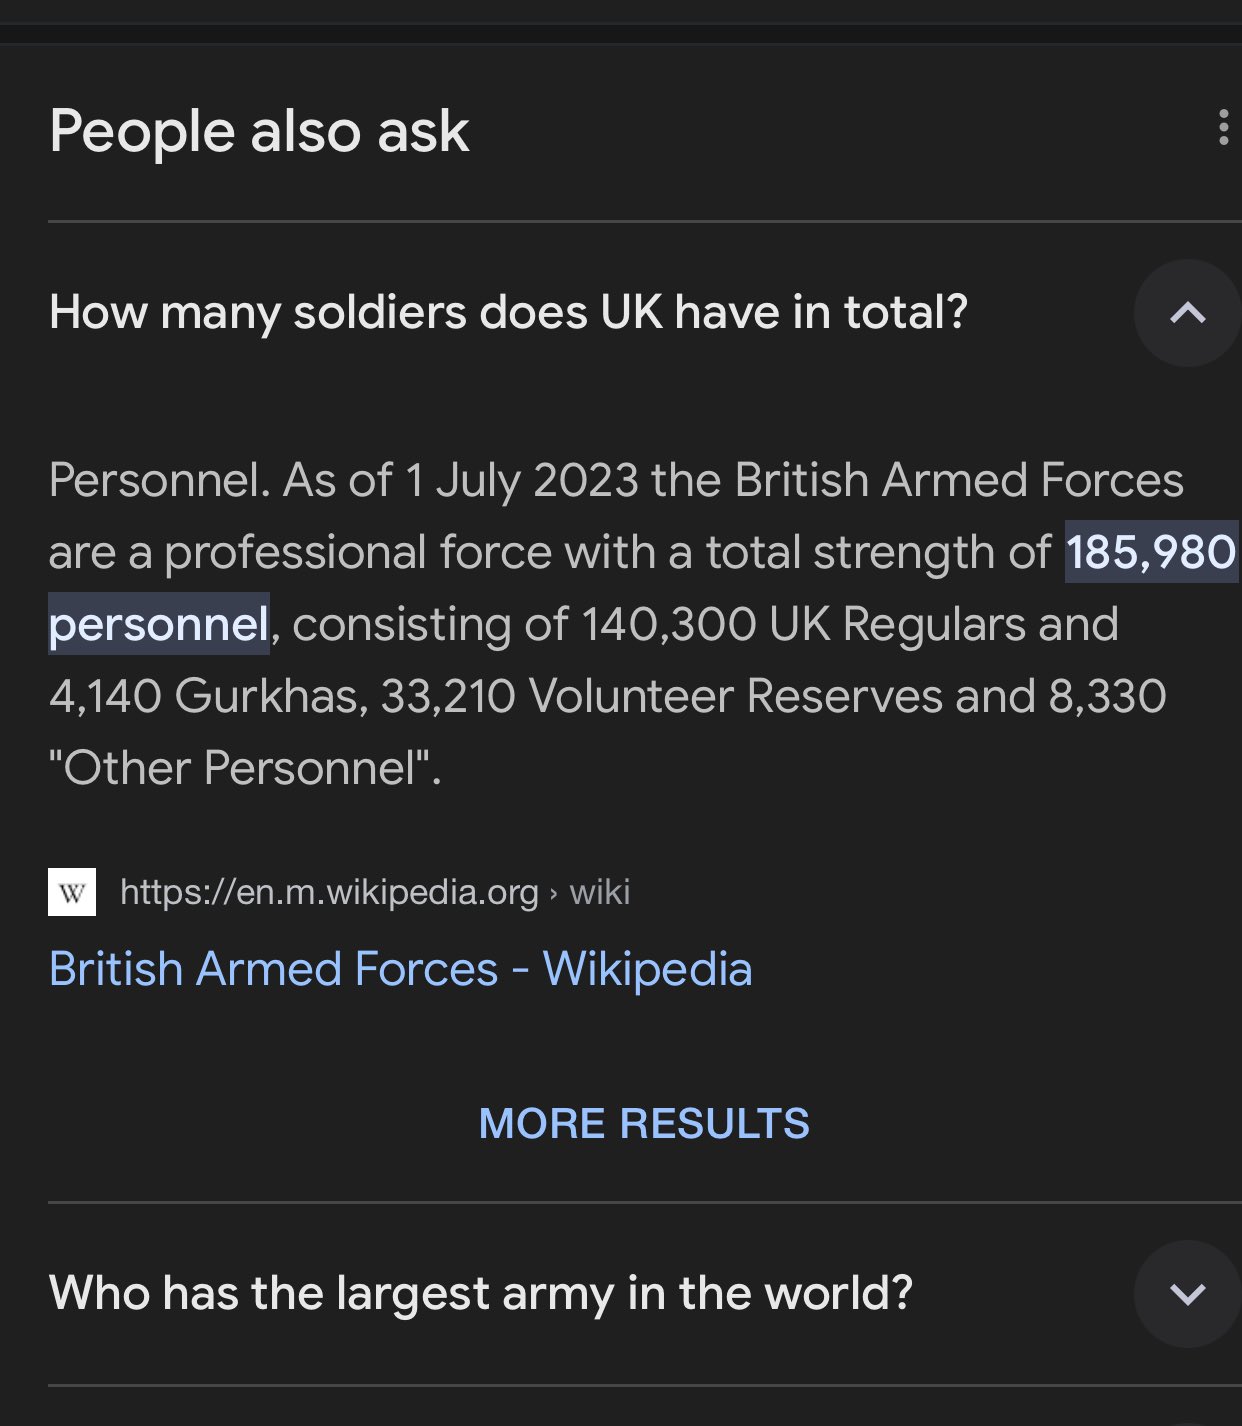 British Armed Forces - Wikipedia